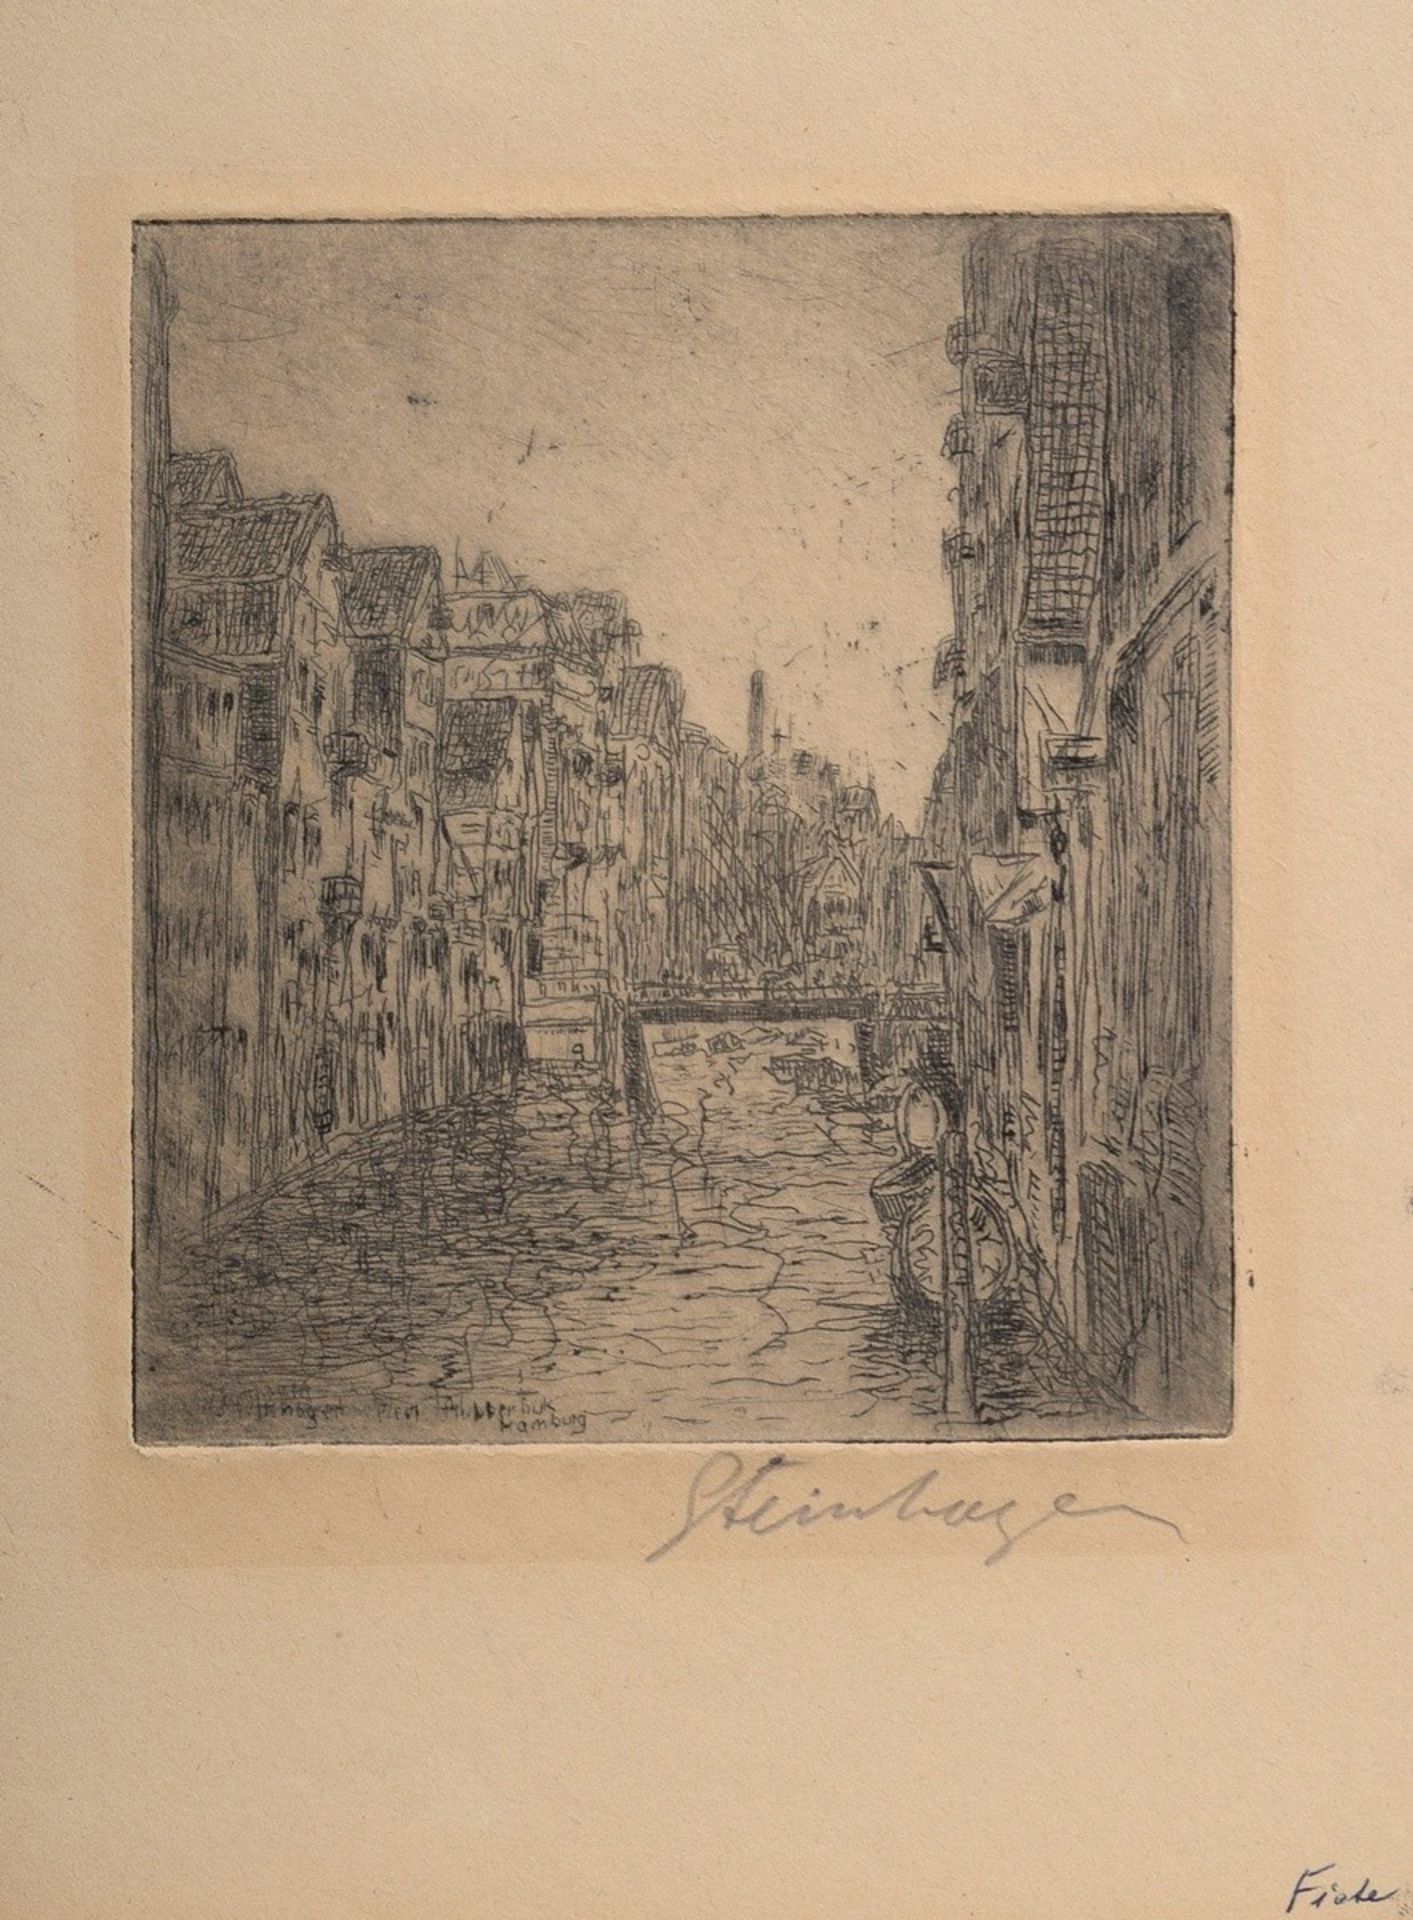 3 Steinhagen, Heinrich (1880-1948) "Hamburg" and "Types", etchings, some signed and titled on the p - Image 4 of 6